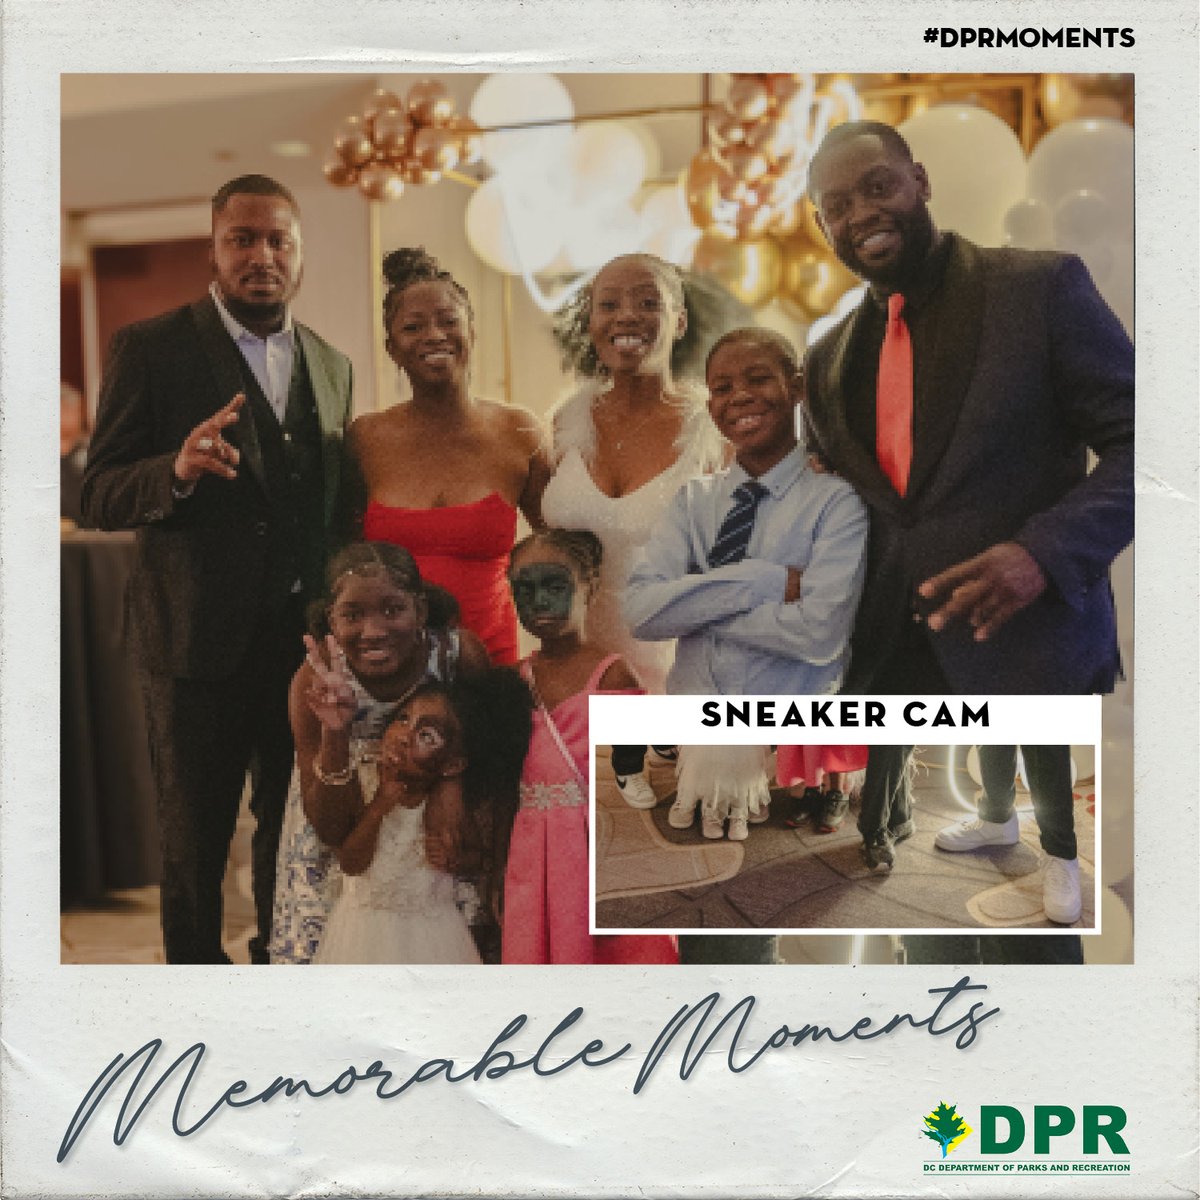 It (was) truly a Family Affair! DPR hosted its first Mother/Son, Daddy/Daughter Sneaker Ball this weekend at the JW Marriott (no doubt!). It provided hundreds of residents with Memorable Moments. More #DPRmoments to come ... check DPR.events